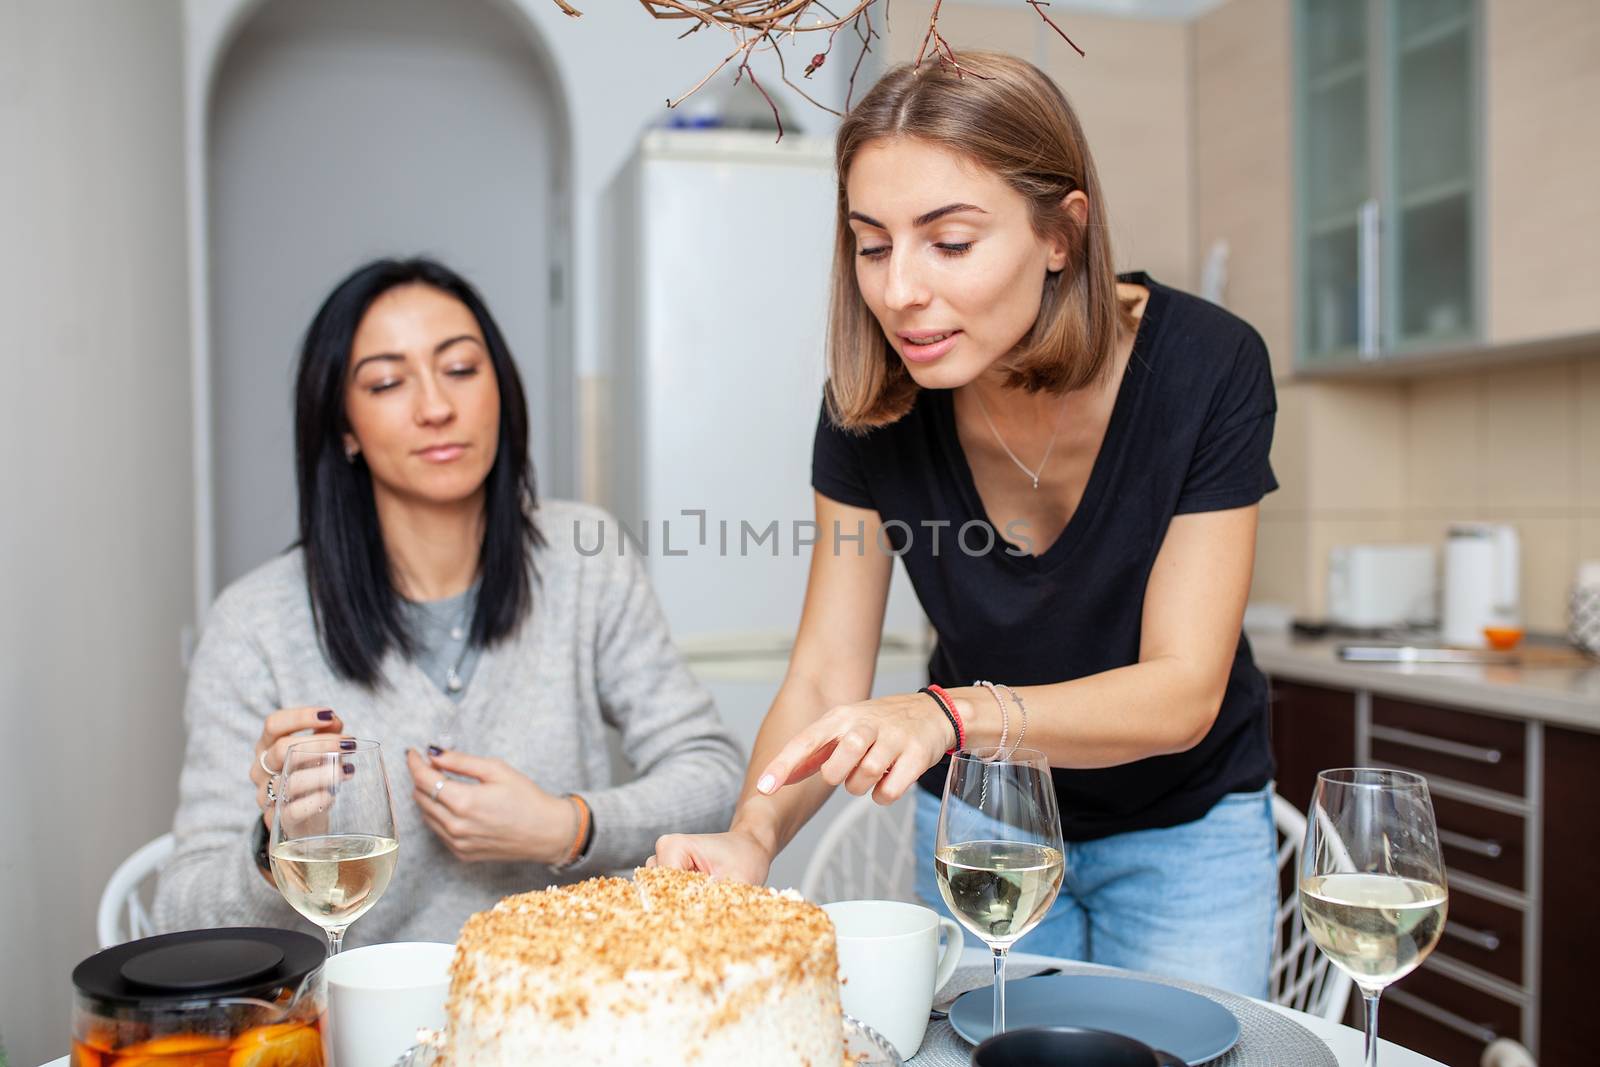 Friends meeting with wine and cake in the modern style kitchen. Women smile and joke. Two girls drink wine in the home kitchen.